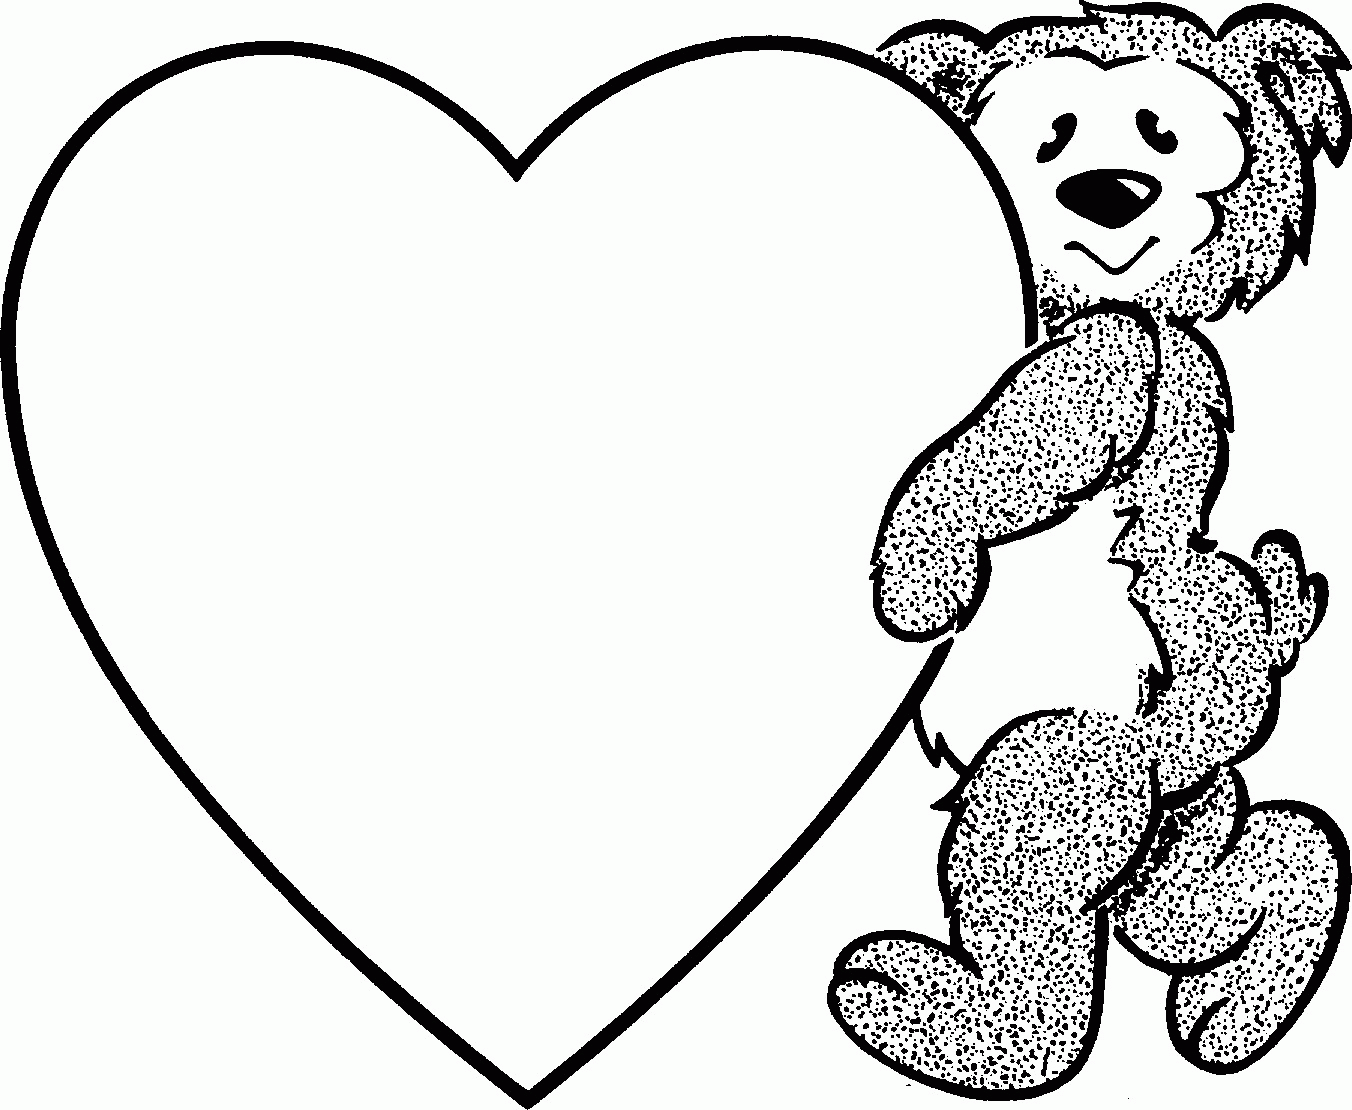 Heart With Wings Coloring Page] - AZ Coloring Pages